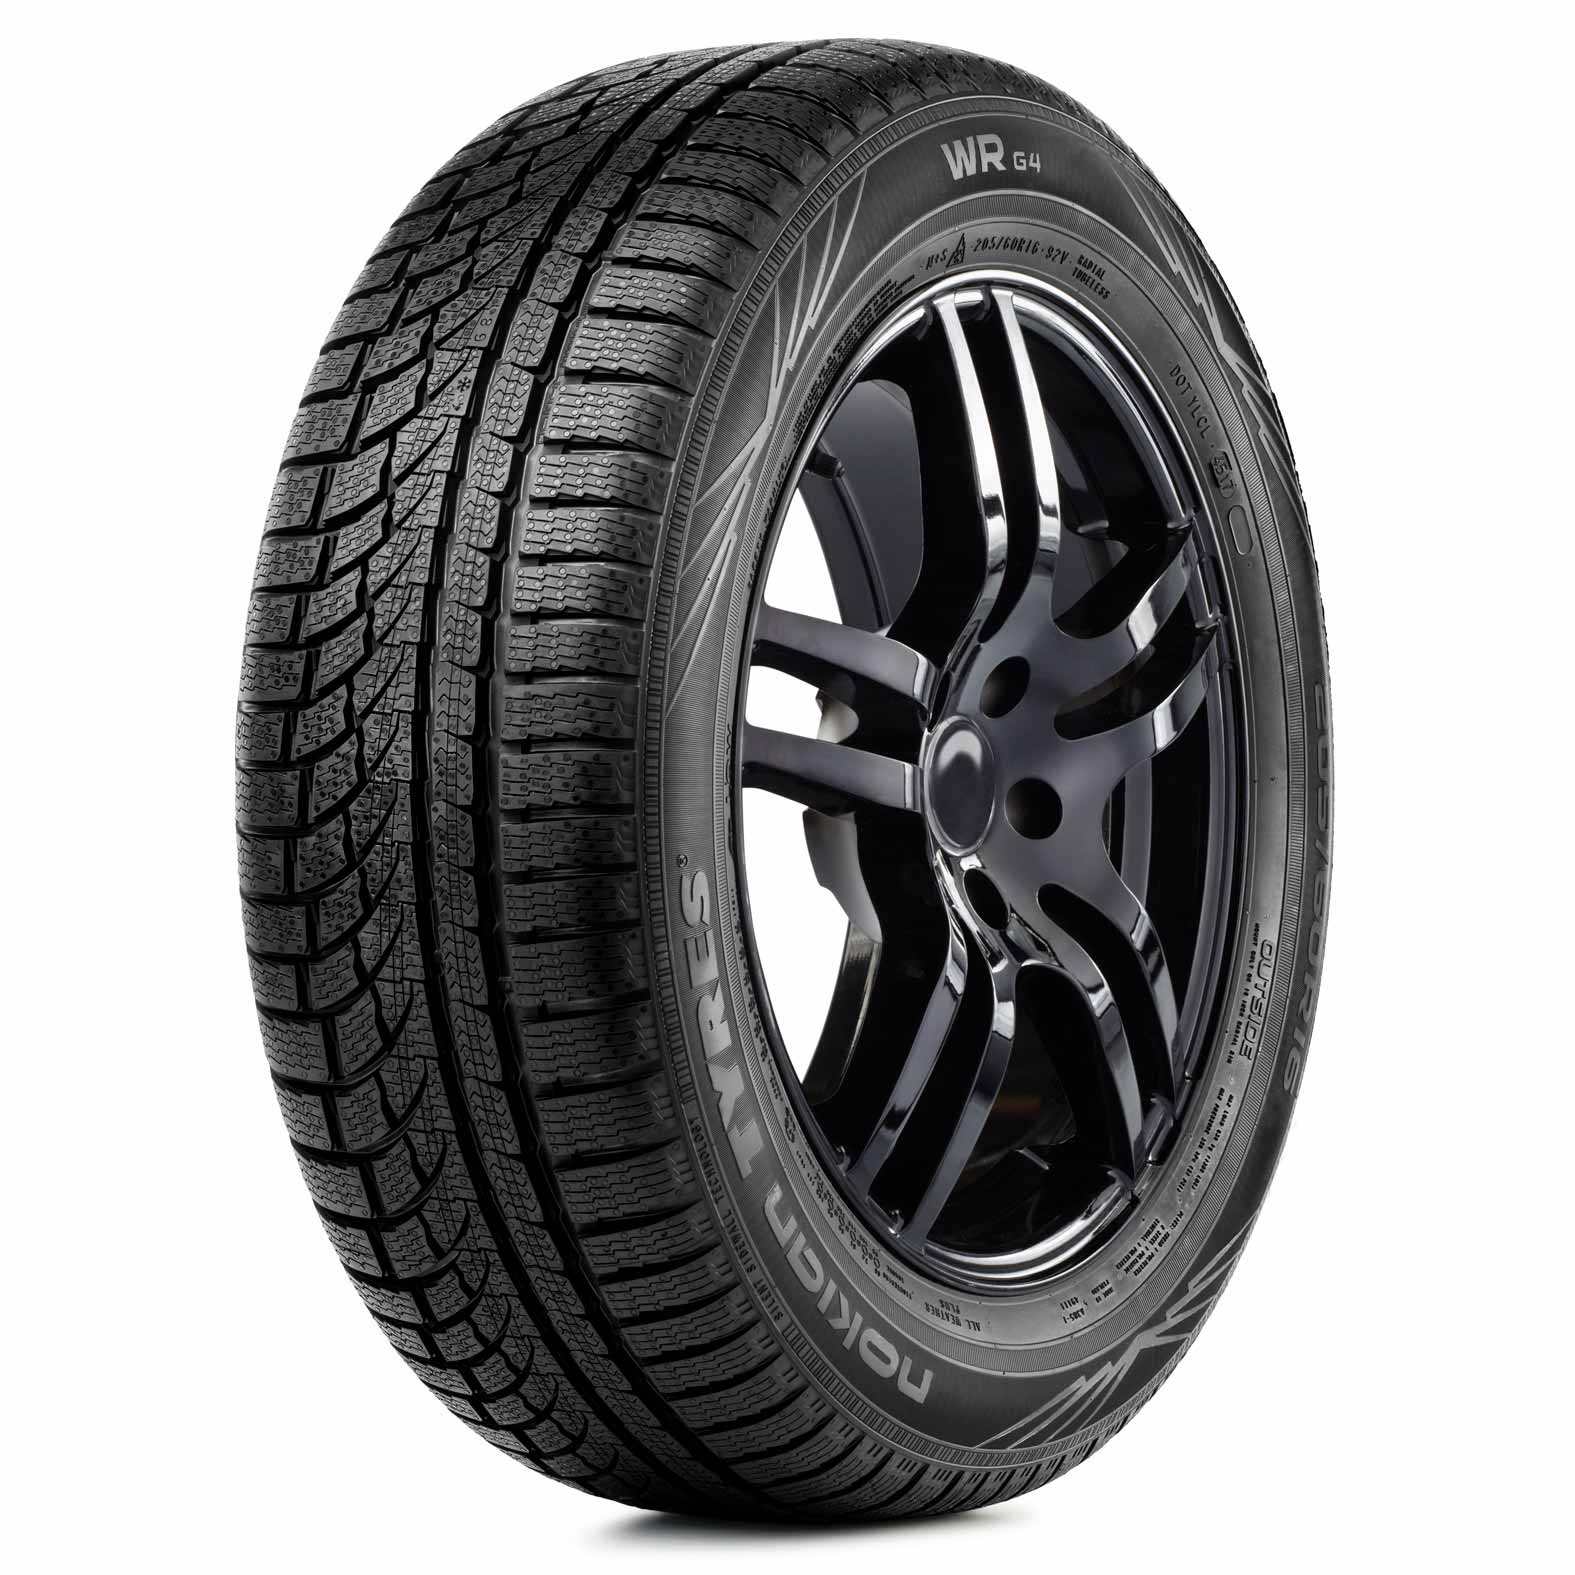 Kal Nokian for WRG4 Tire | Tires All-Weather